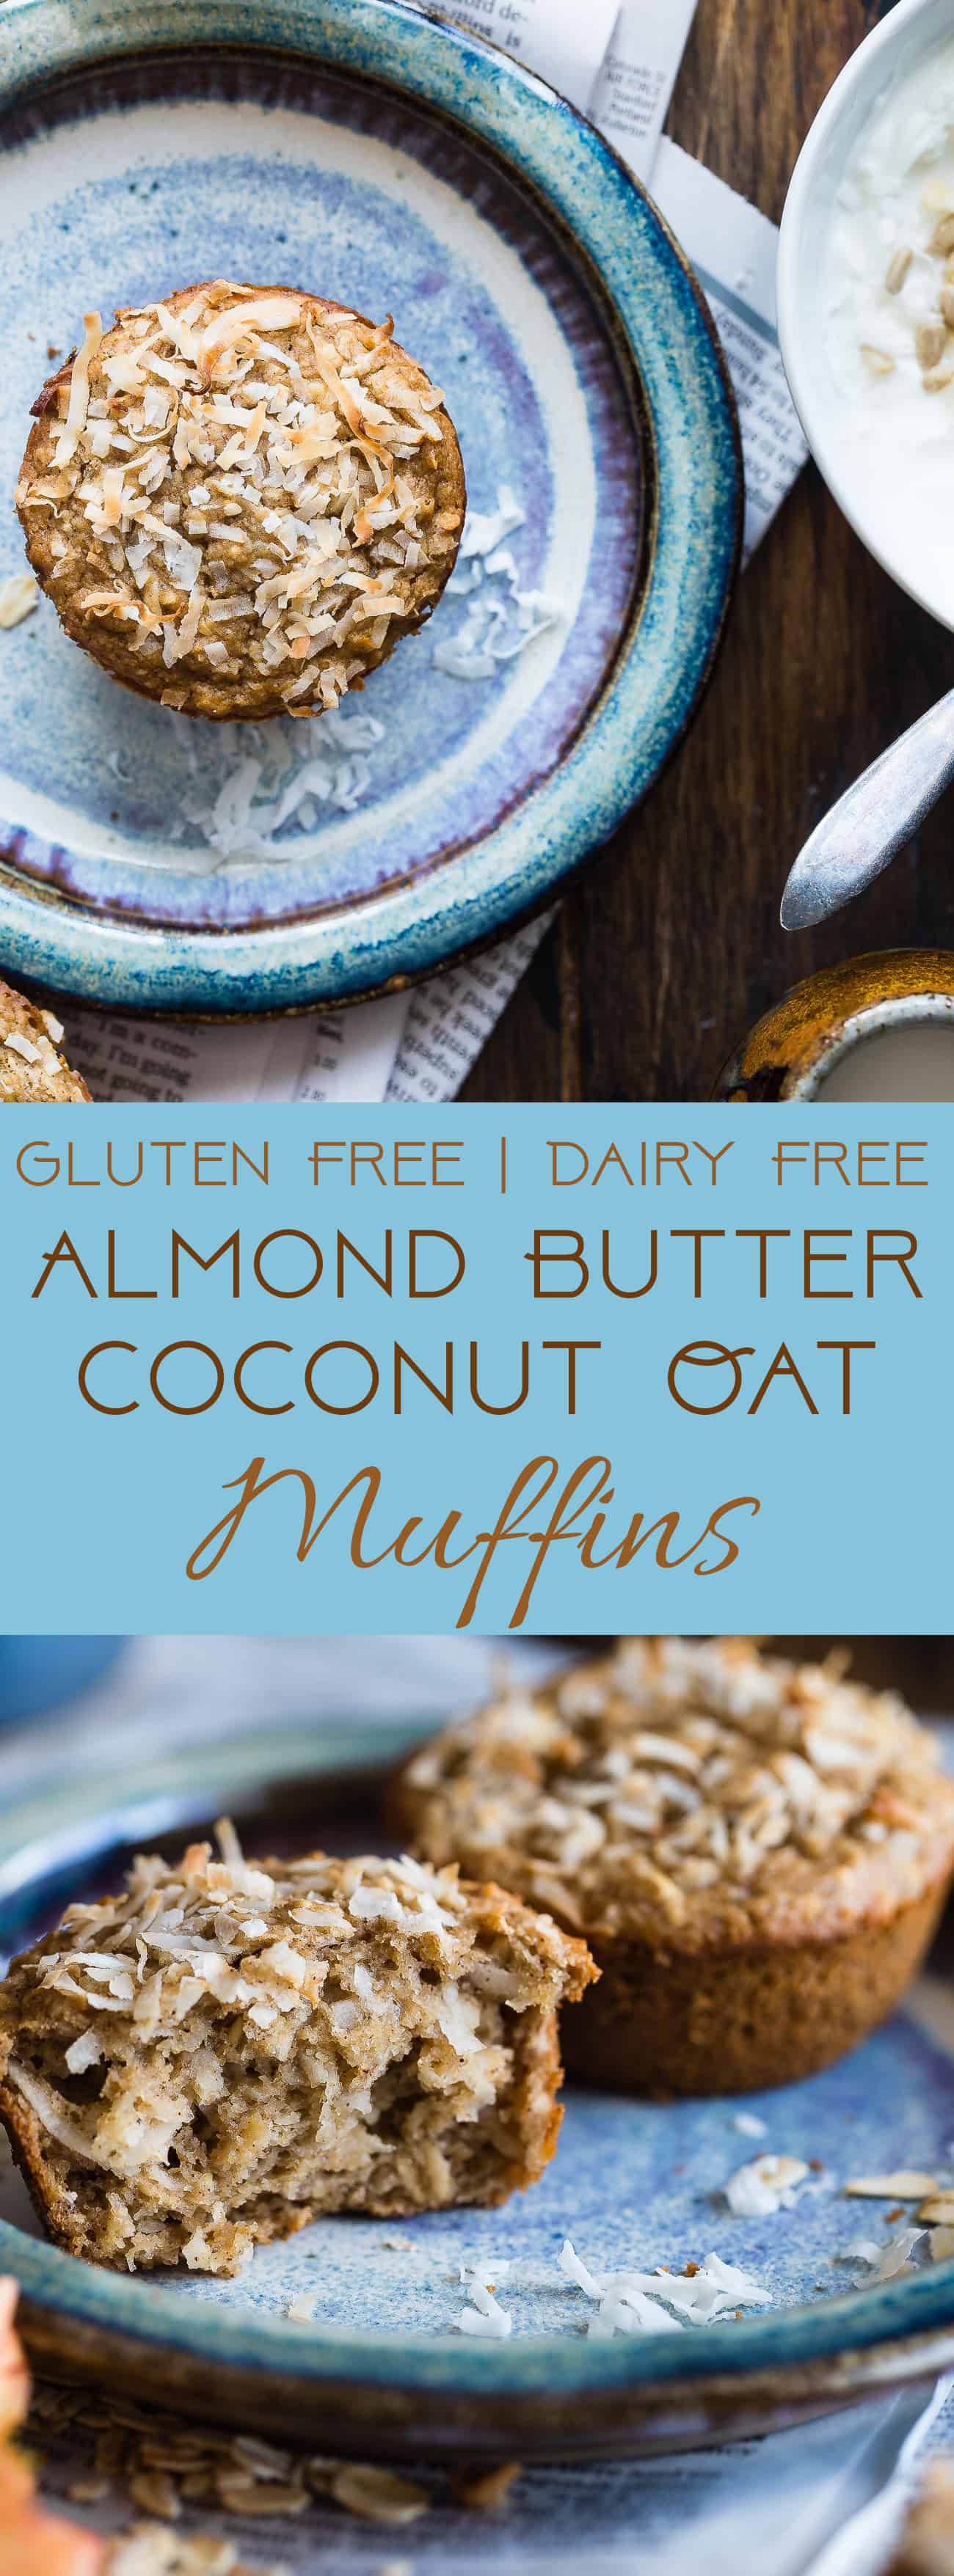 Gluten Free Coconut Almond Butter Oatmeal Muffins - These healthy, dairy free muffins are made with simple, wholesome ingredients like oatmeal and almond butter and topped with coconut! They use applesauce instead of oil to keep them SO moist! | #Foodfaithfitness | #Glutenfree #Healthy #Almondbutter #Coconut #Muffins